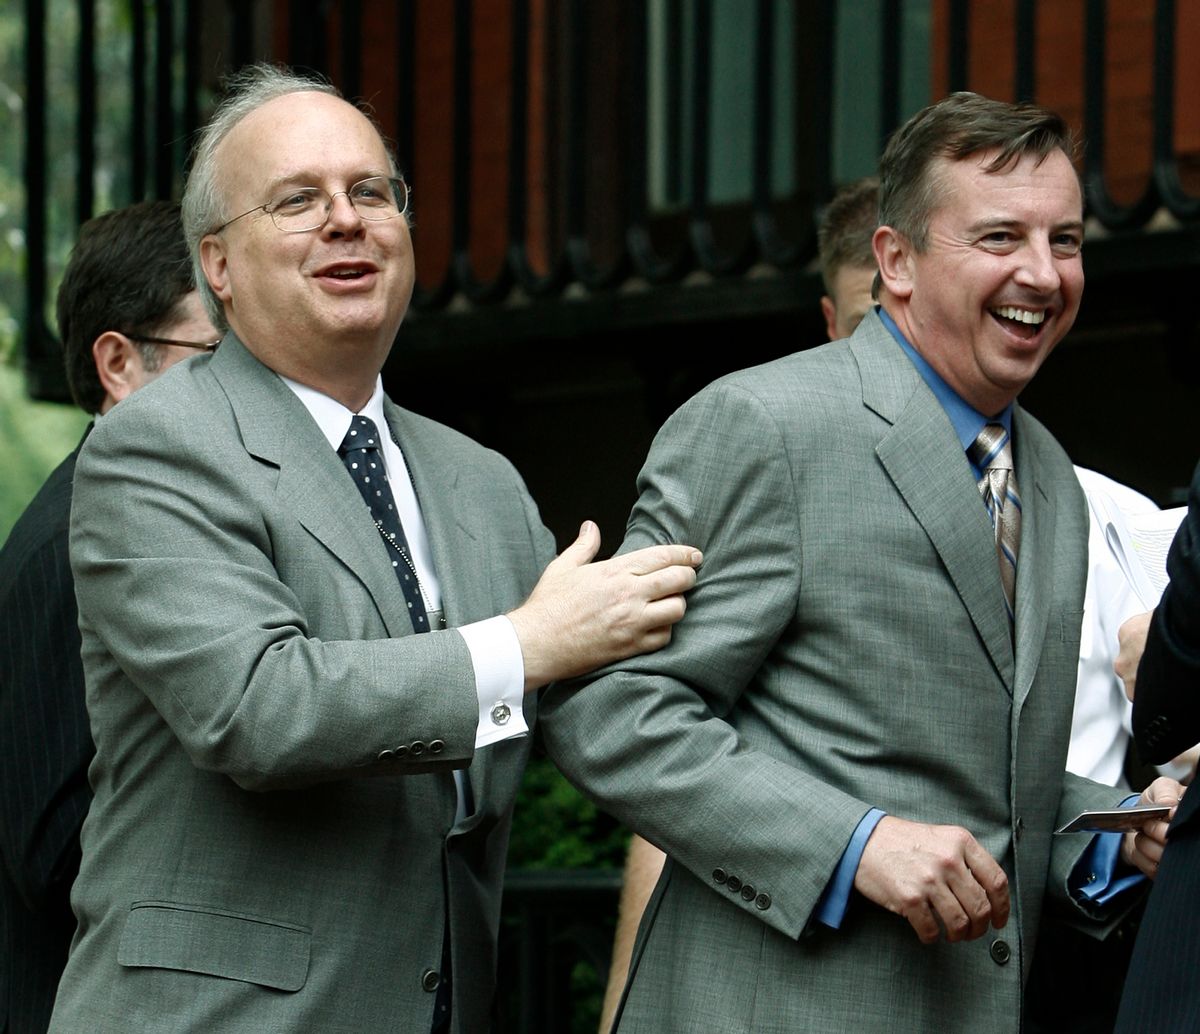 U.S. President George W. Bush's political strategist Karl Rove (L) jokes around with White House staffer Ed Gillespie as they walk to a farewell party for former Director of the Office of Management and Budget, Rob Portman, across from the White House on Pennsylvania Avenue in Washington, August 1, 2007.     REUTERS/Jason Reed      (UNITED STATES)  (Reuters)